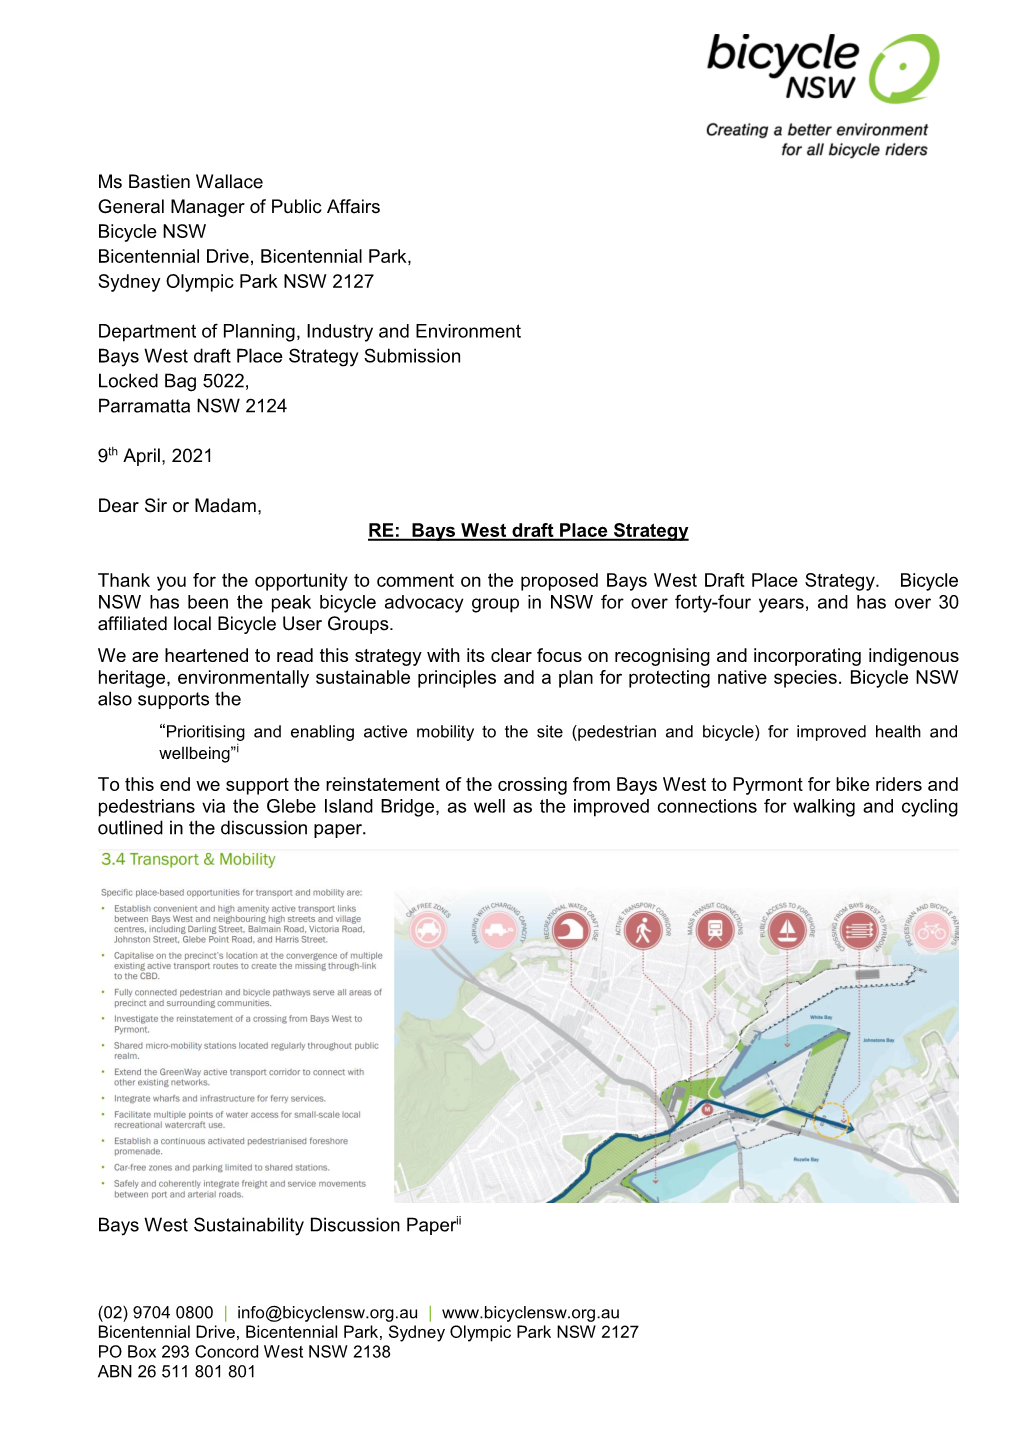 Bays West Draft Place Strategy Submission Locked Bag 5022, Parramatta NSW 2124